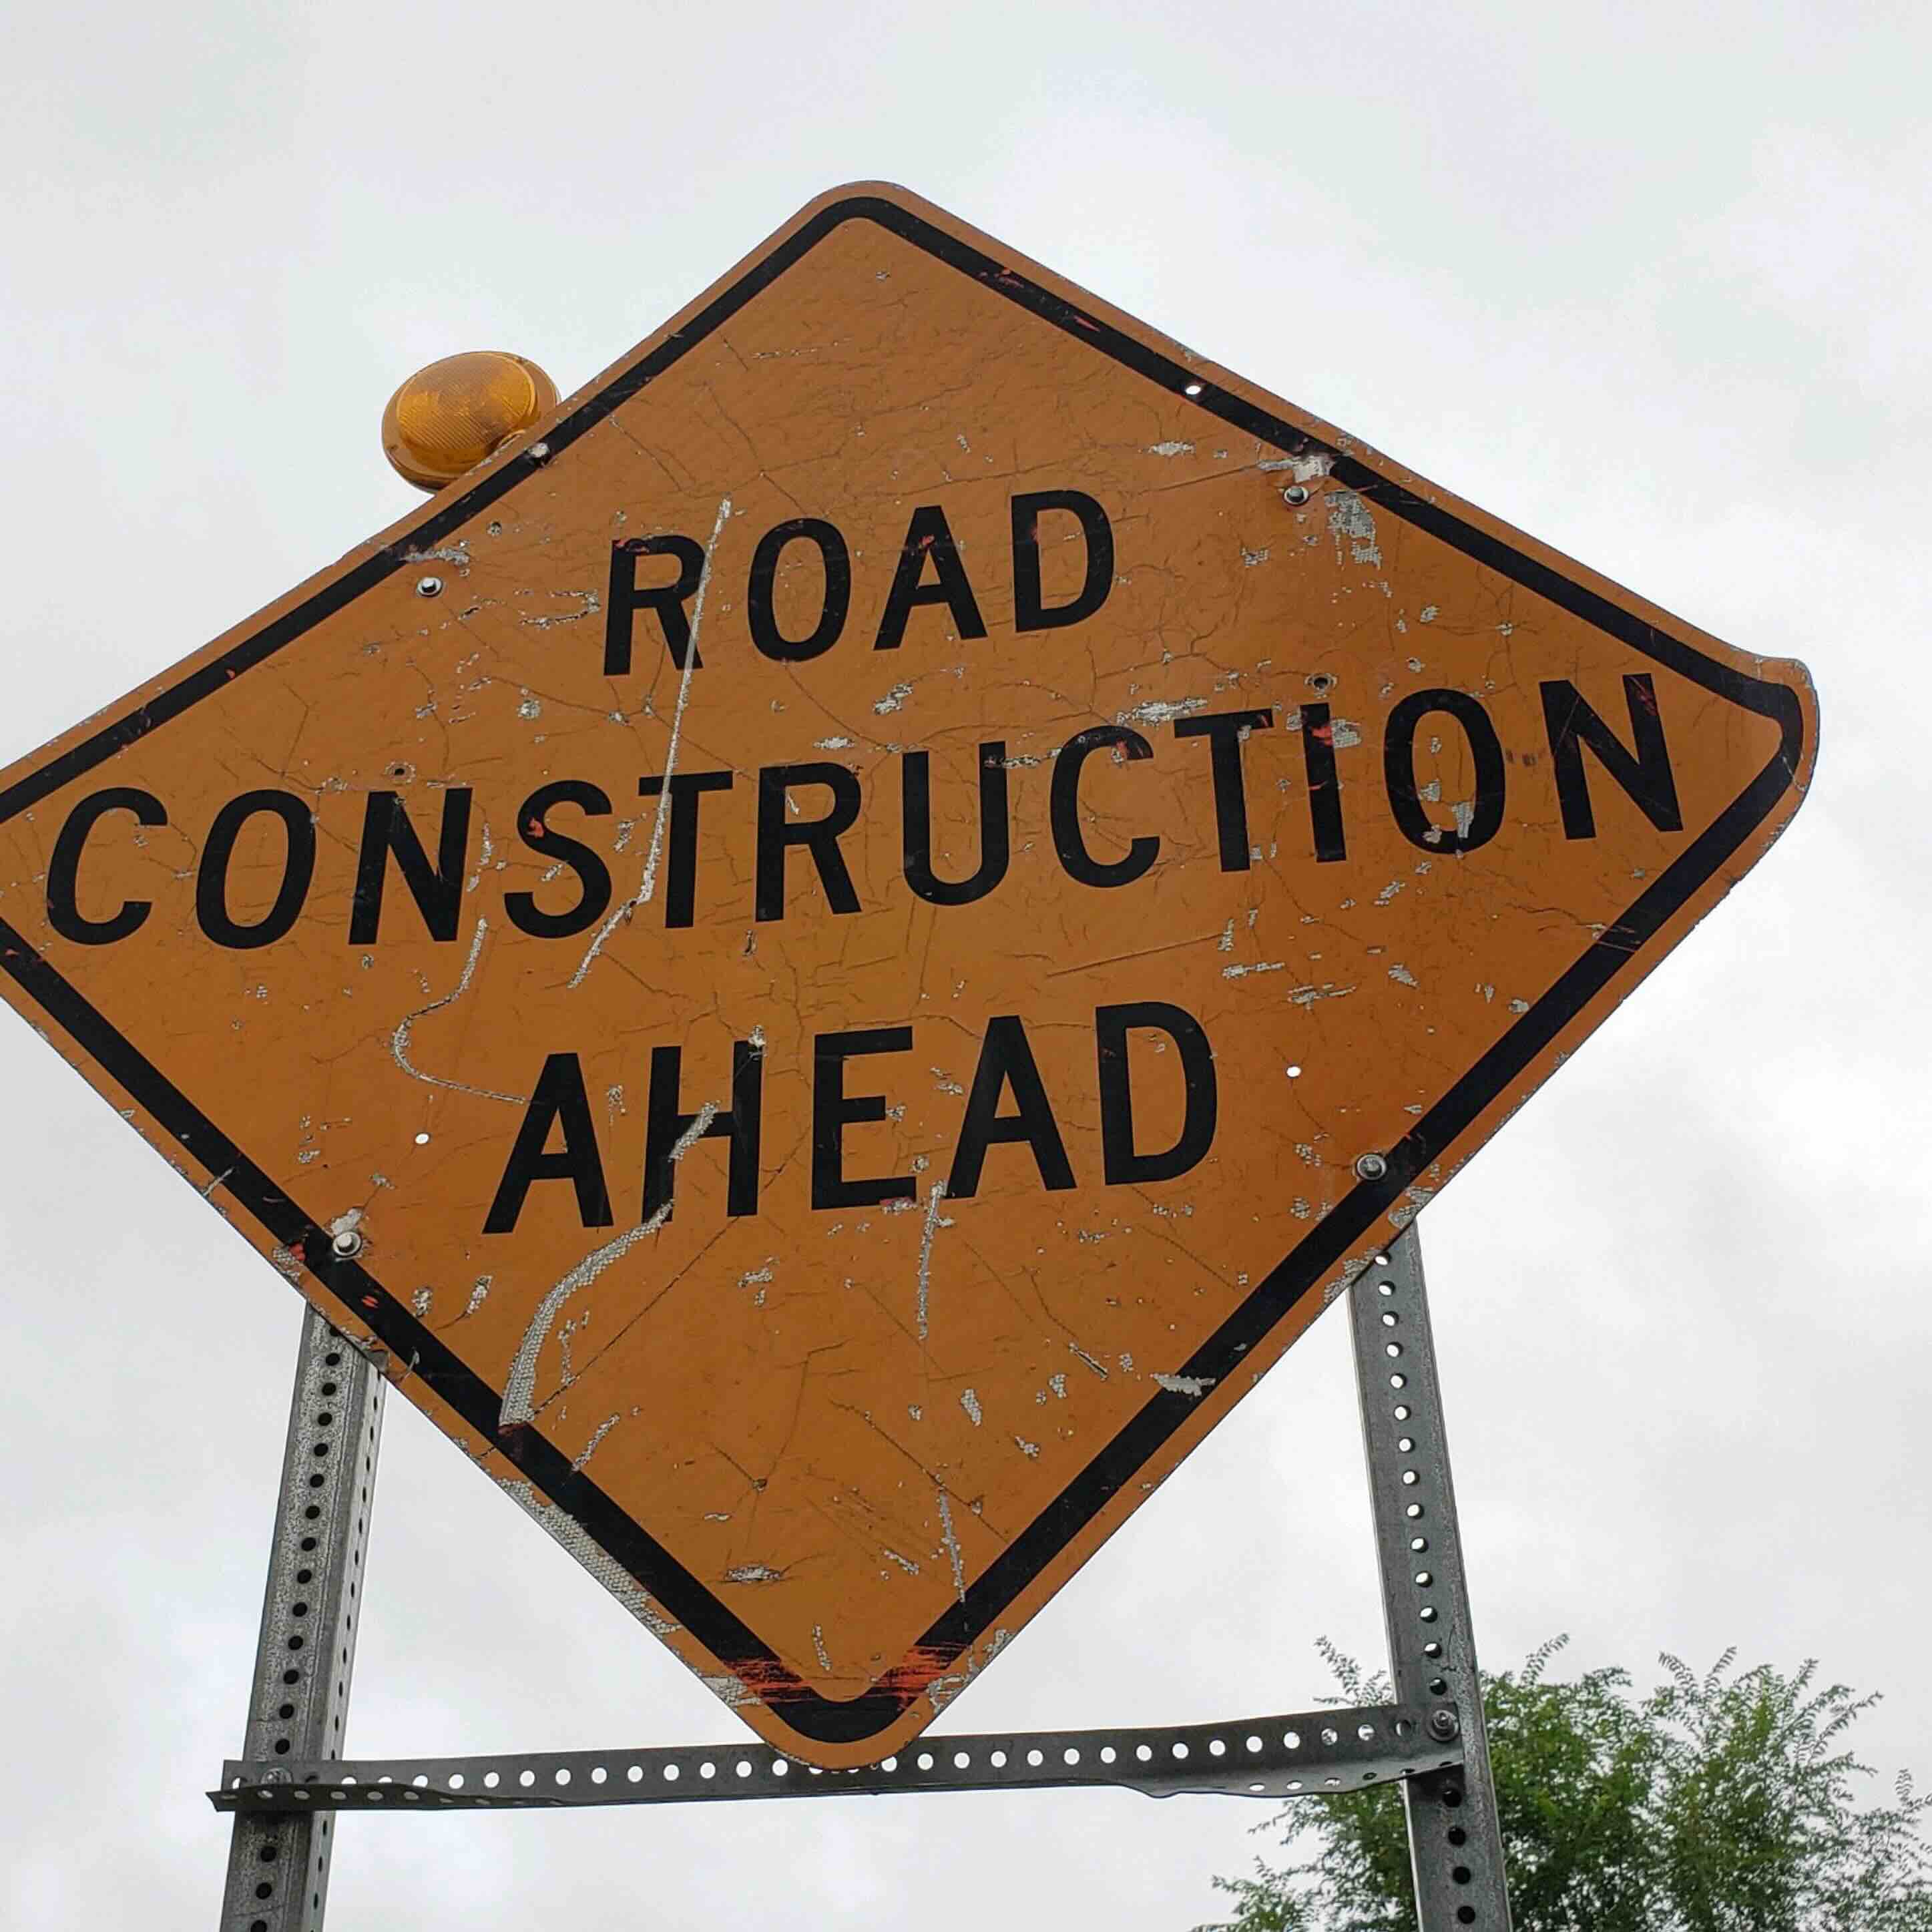 What Does The Road Construction Ahead Sign Mean